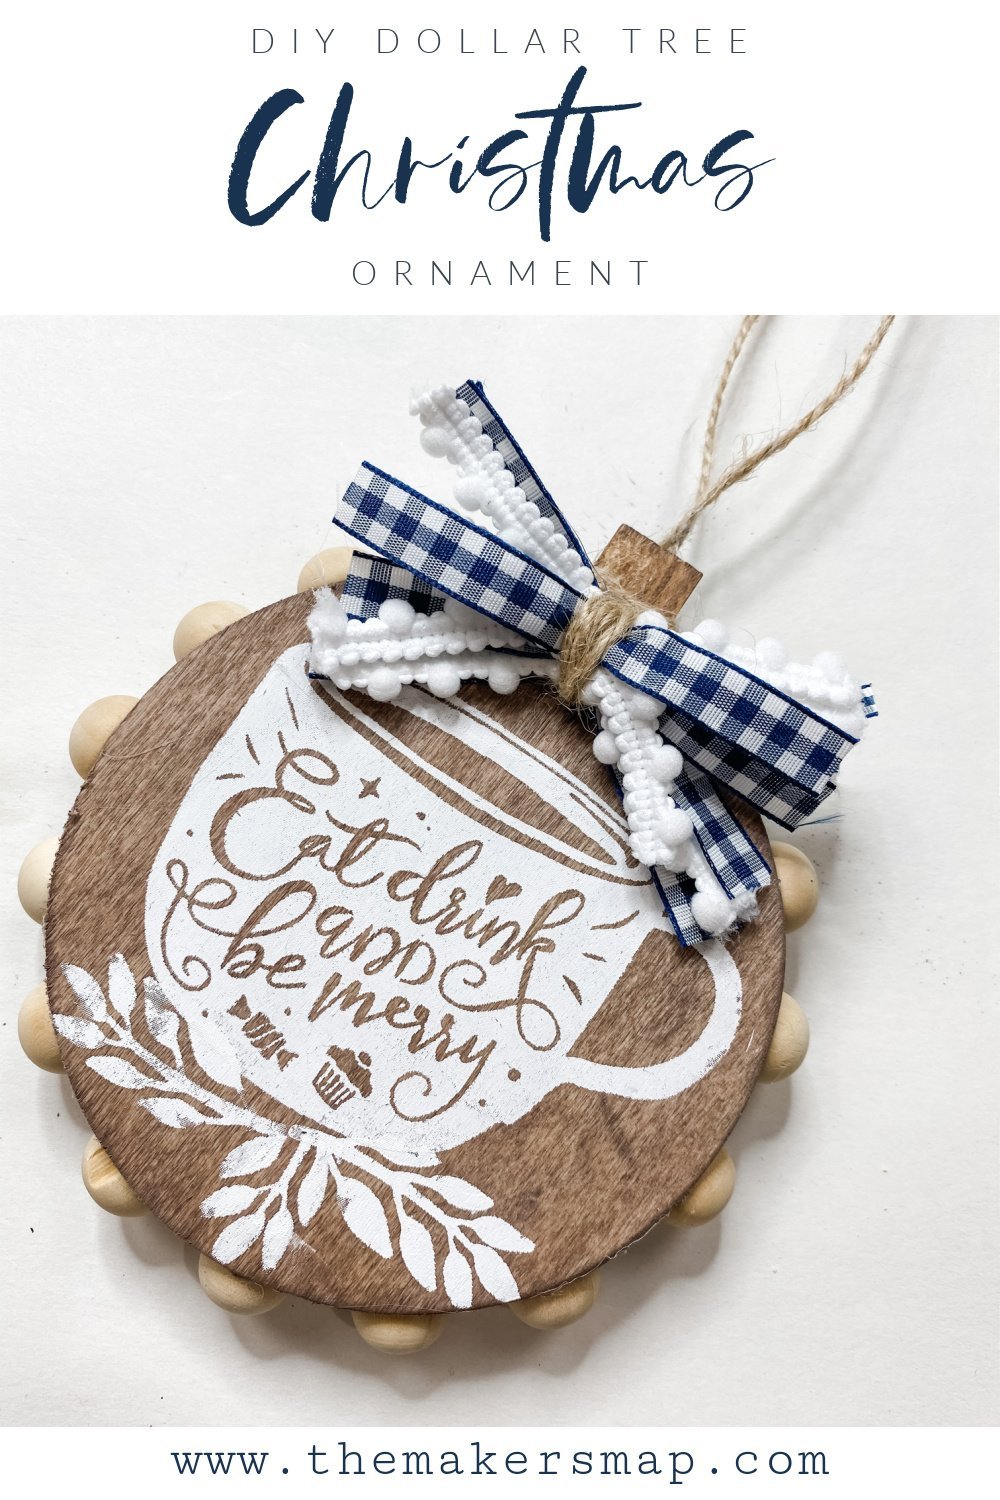 How to Stain Wood Ornaments from Dollar Tree for Christmas